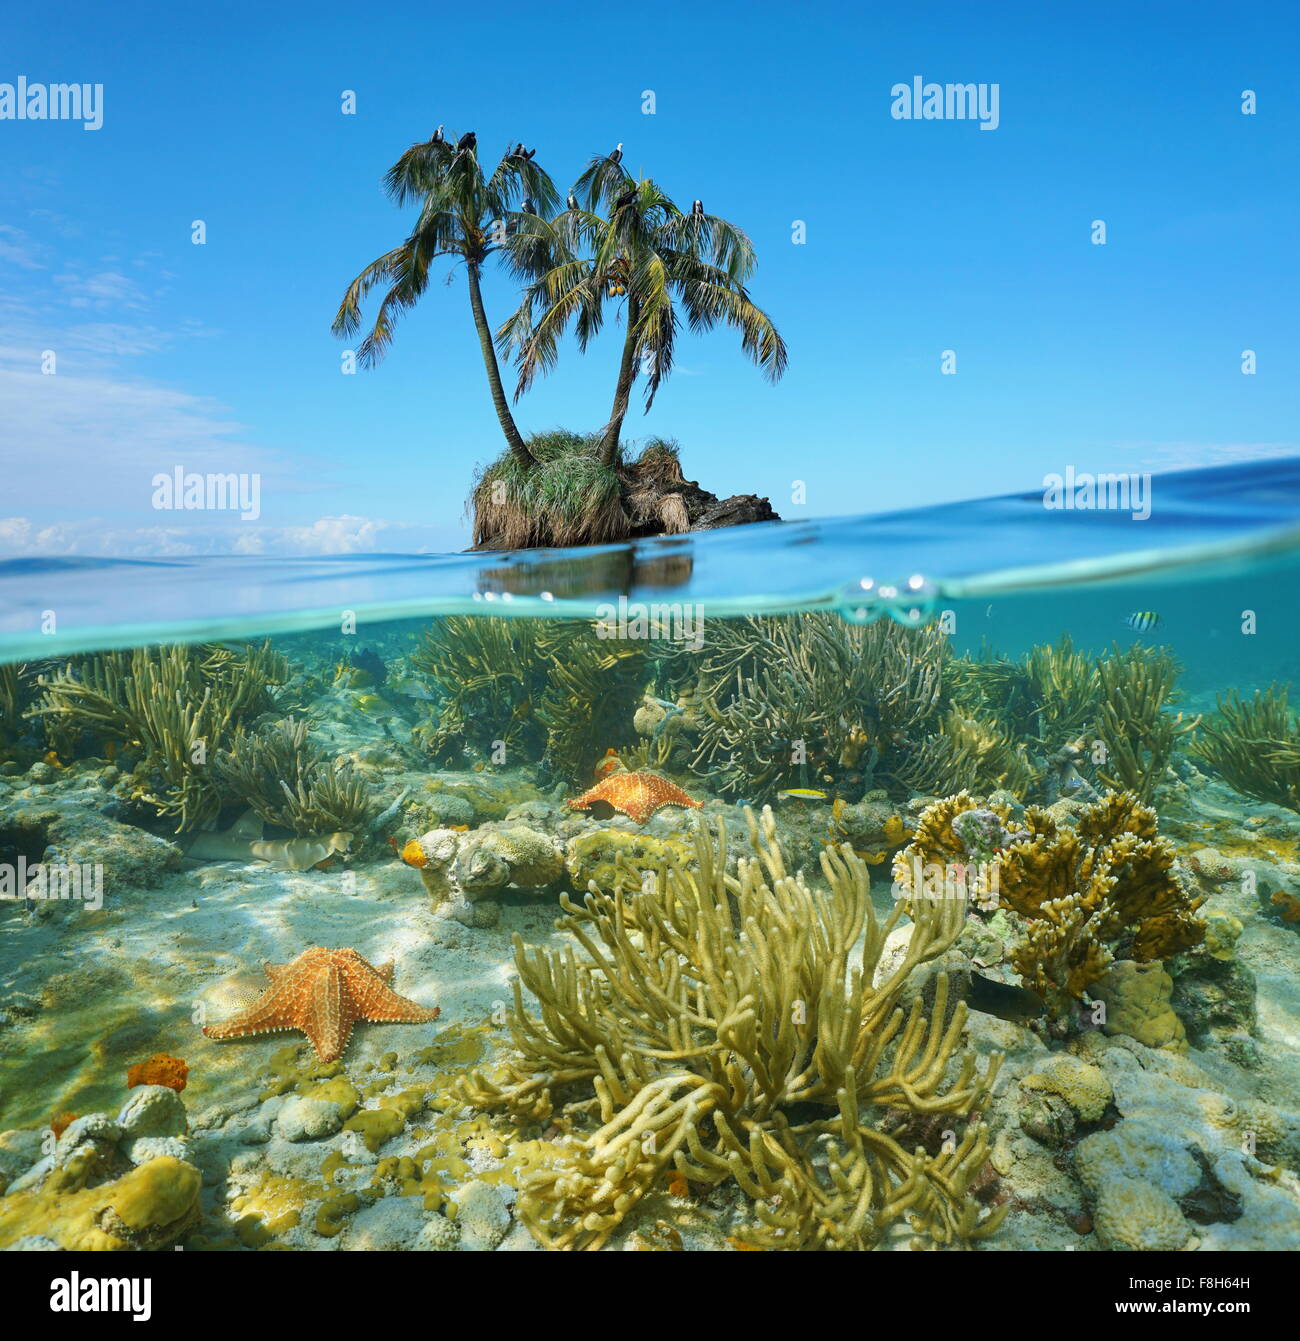 Split image over and under sea surface near an islet with two coconut trees above waterline and corals with starfish underwater Stock Photo